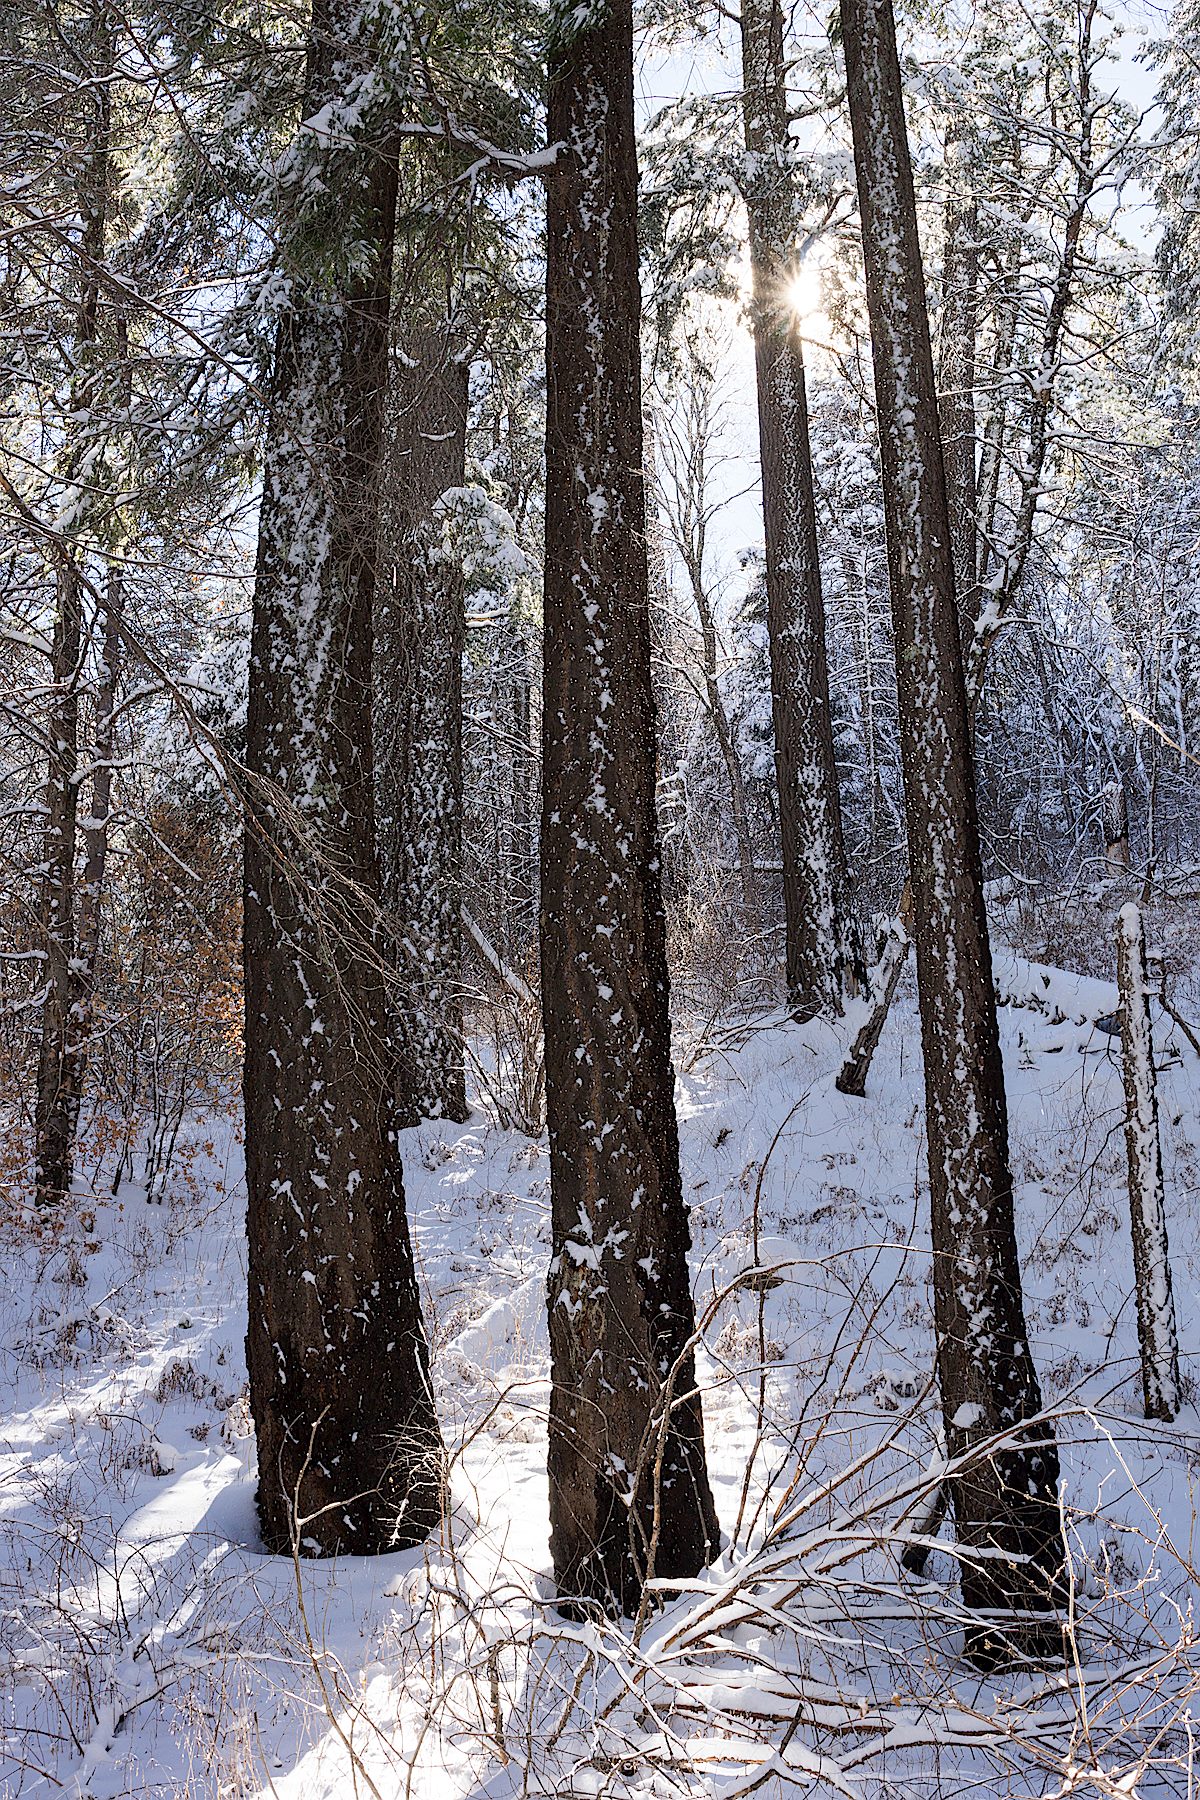 Sun and snow on the Aspen Draw Trail. December 2014